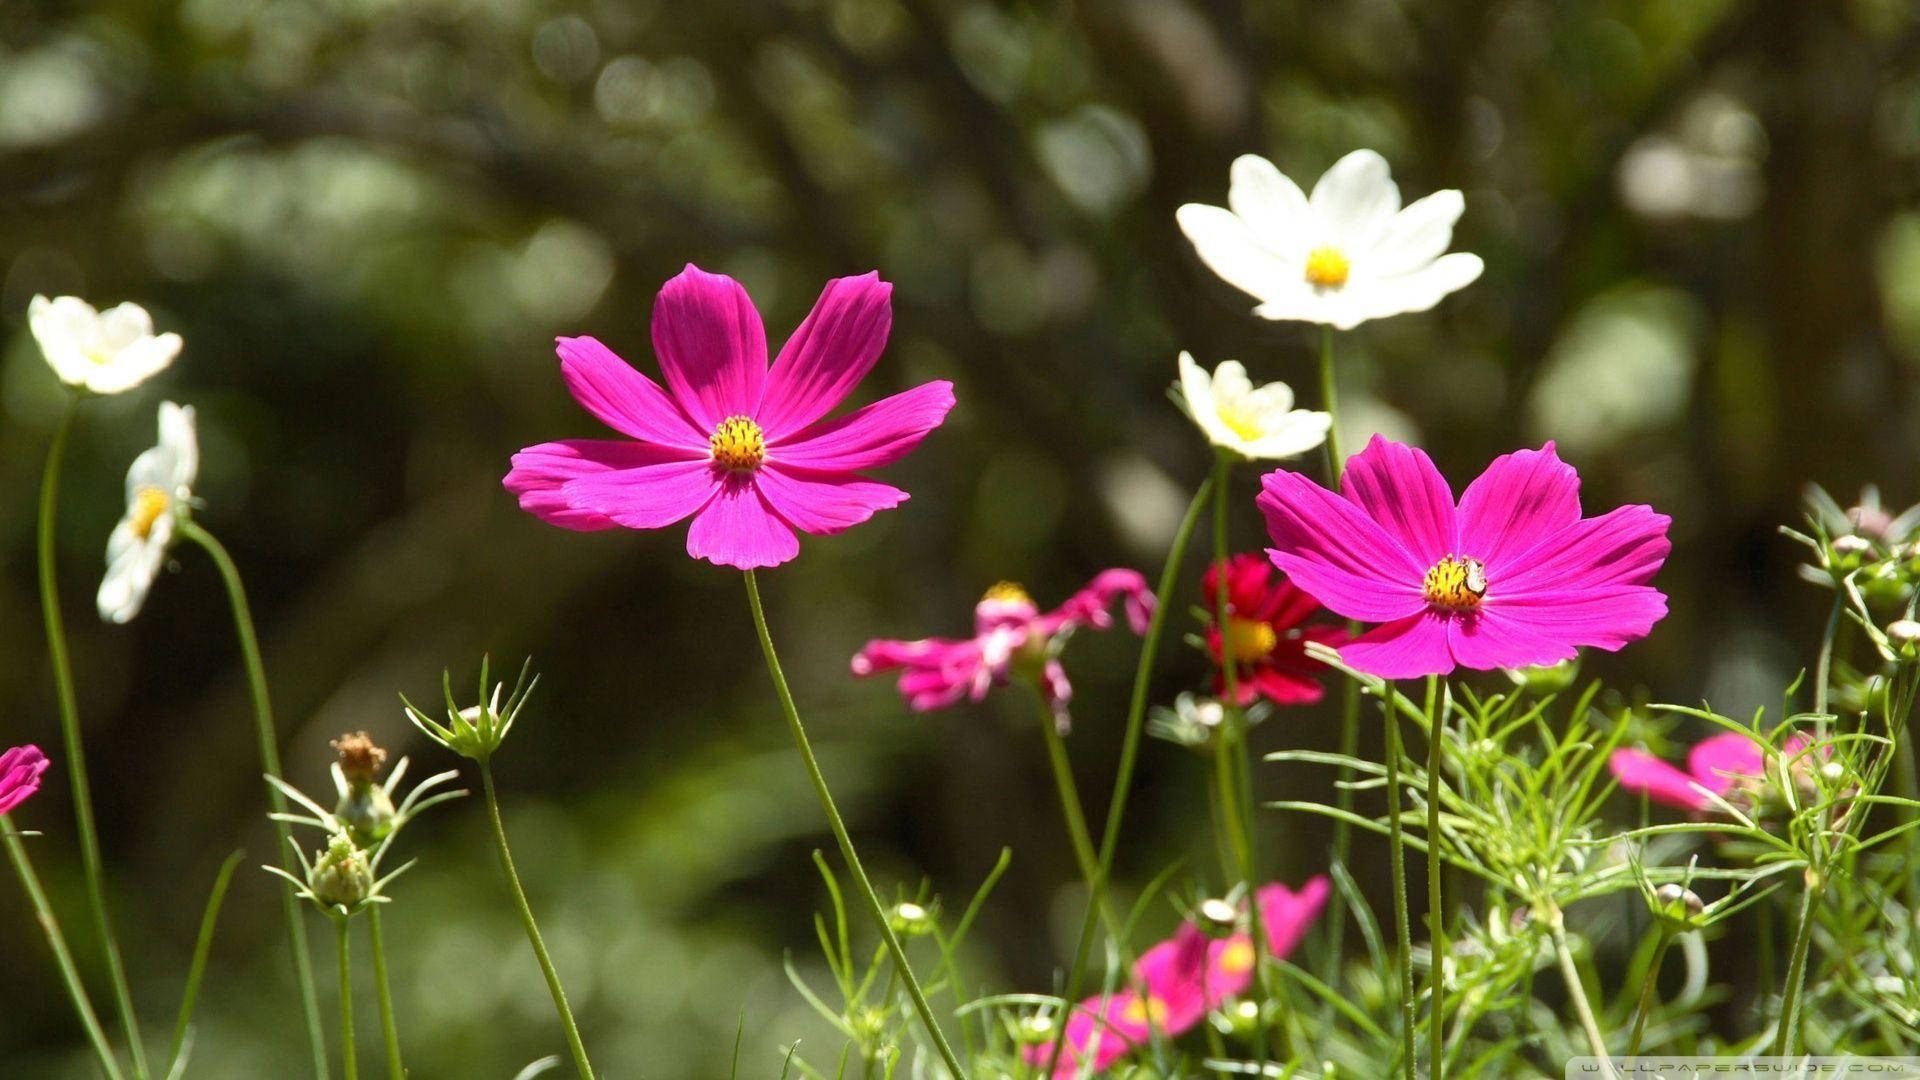 Flower Hd Pink And White Cosmos Wallpaper